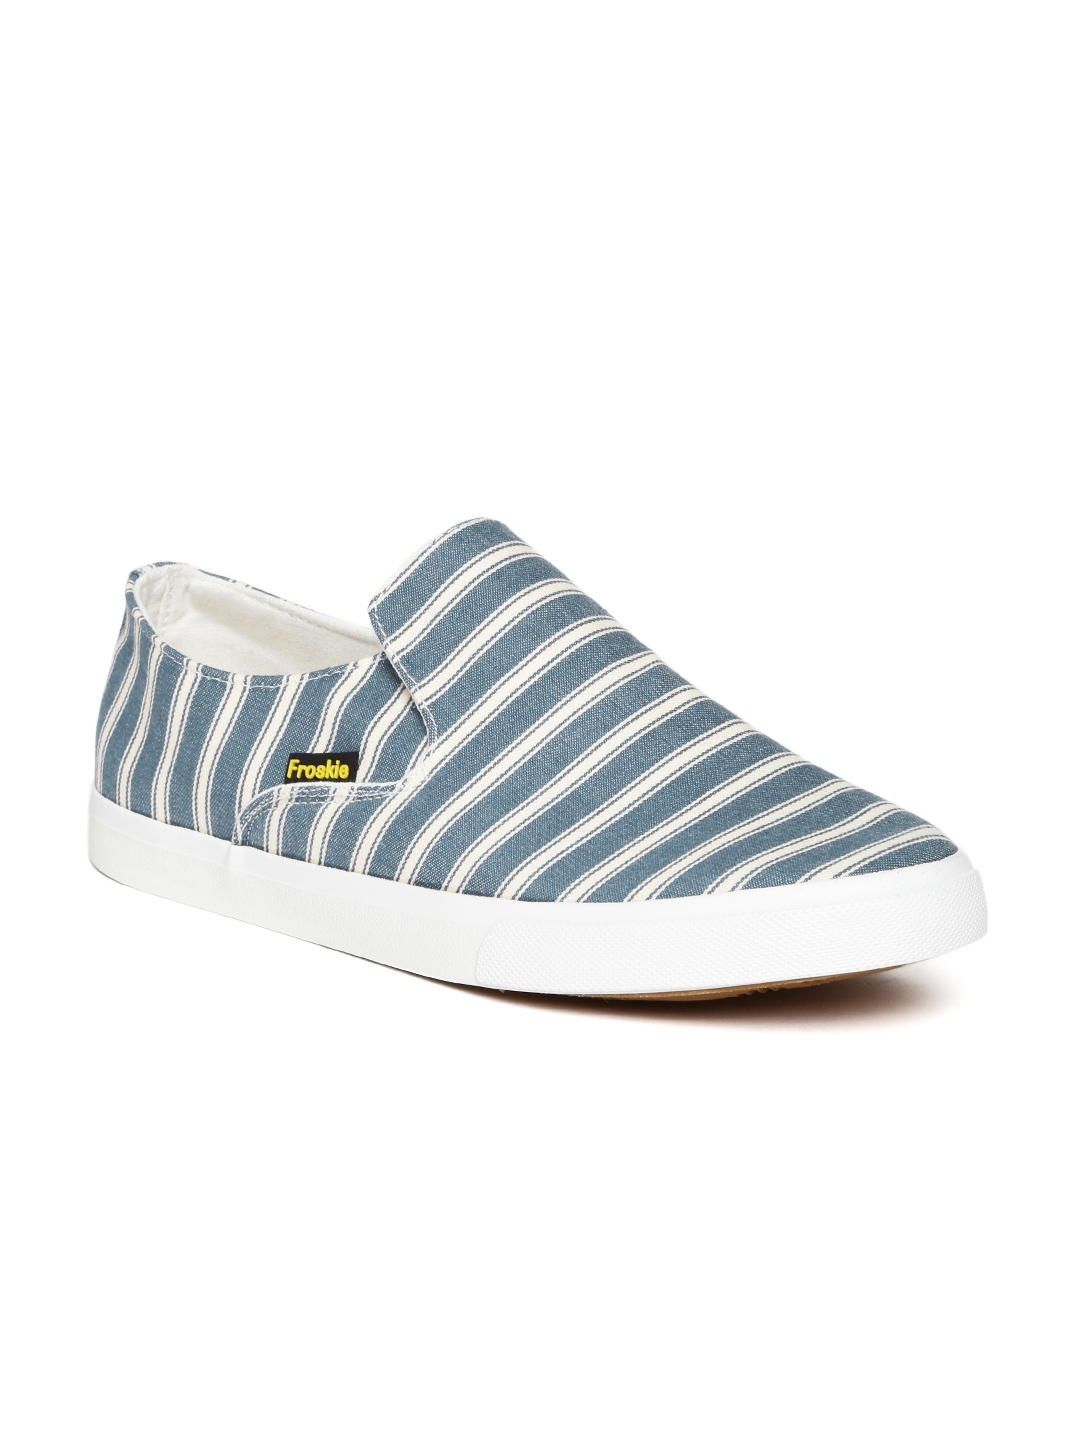 Buy Froskie Men Blue & Cream Coloured Striped Slip Ons - Casual Shoes ...